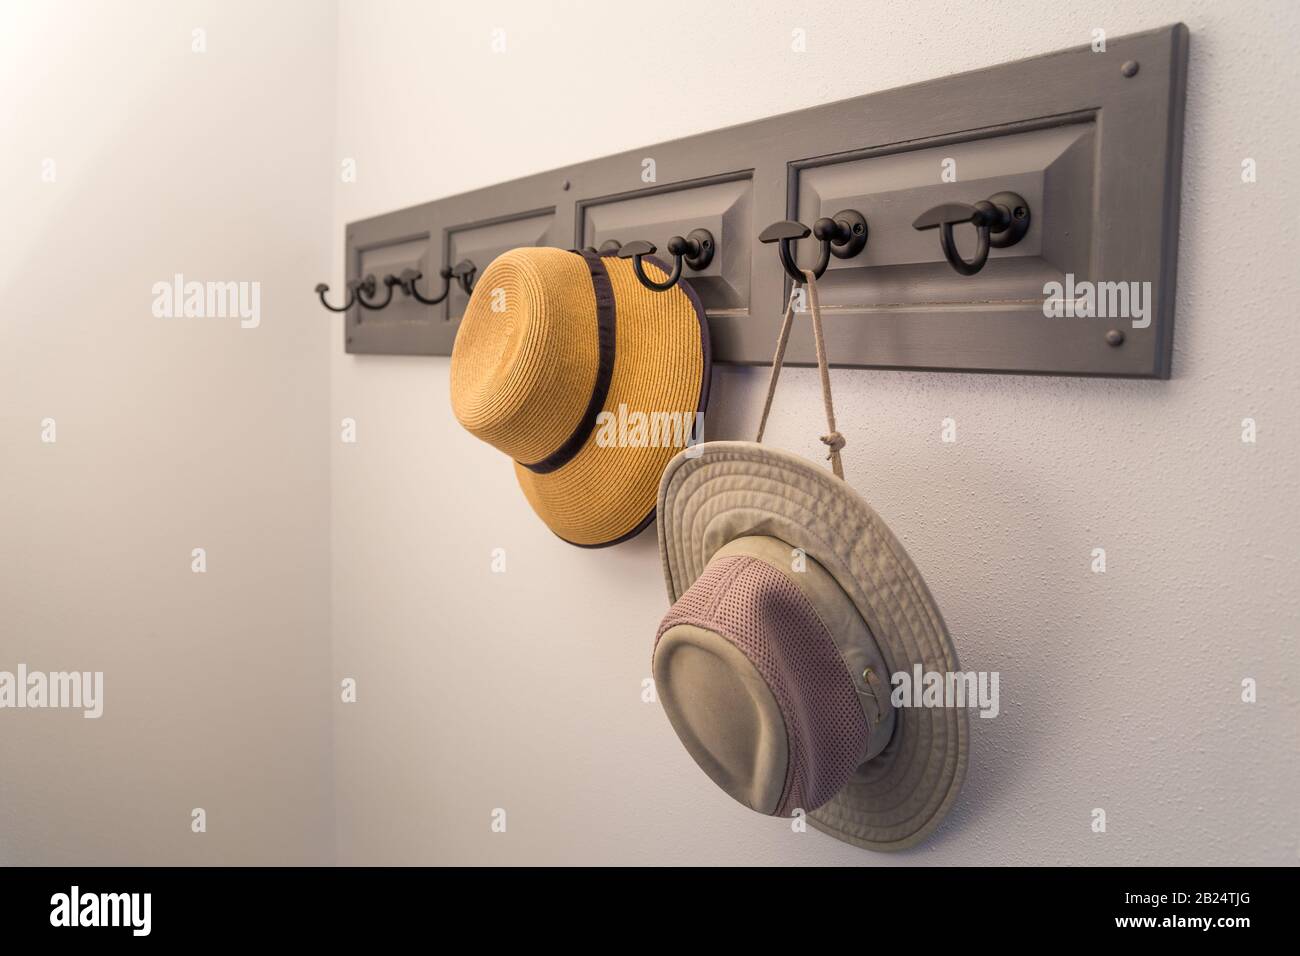 Two hats hanging on a coat rack, view from the side. No people. Horizontal picture. Stock Photo